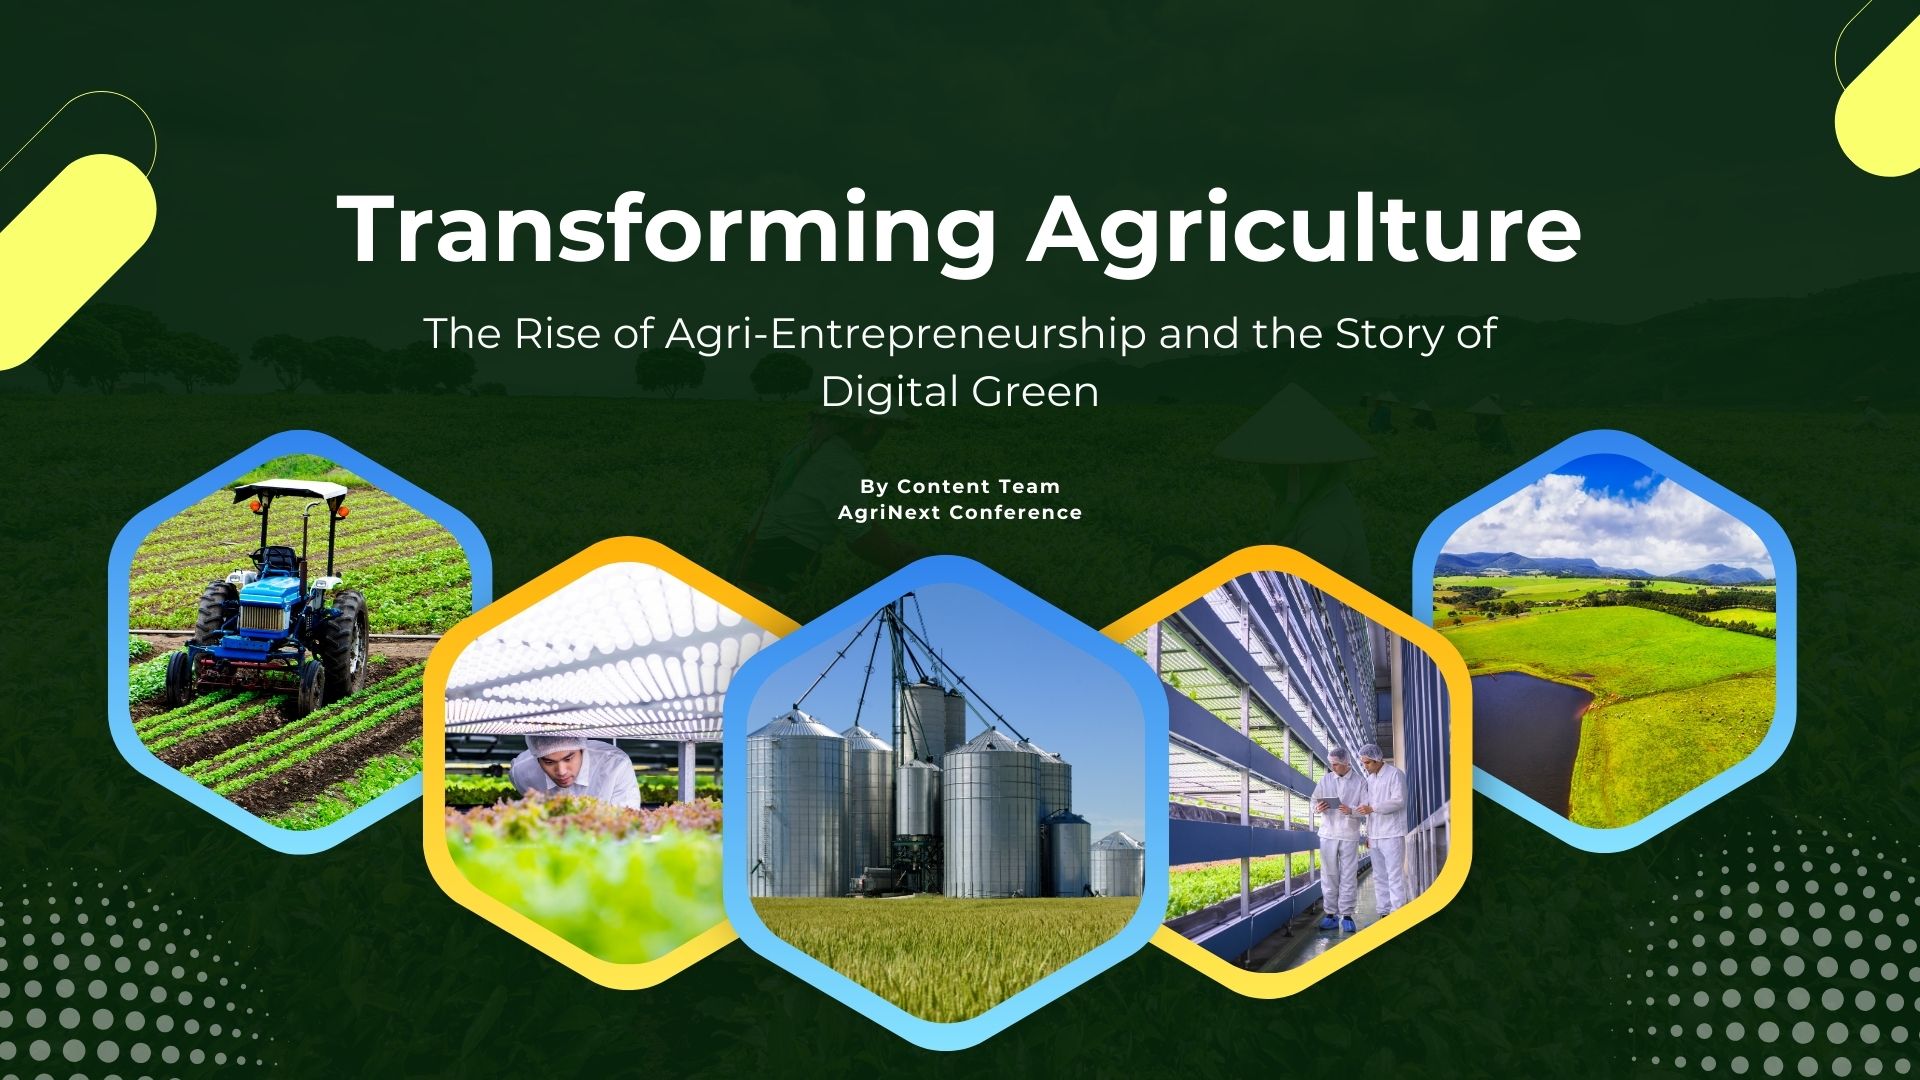 Transforming Agriculture: The Rise of Agri-Entrepreneurship and the Story of Digital Green